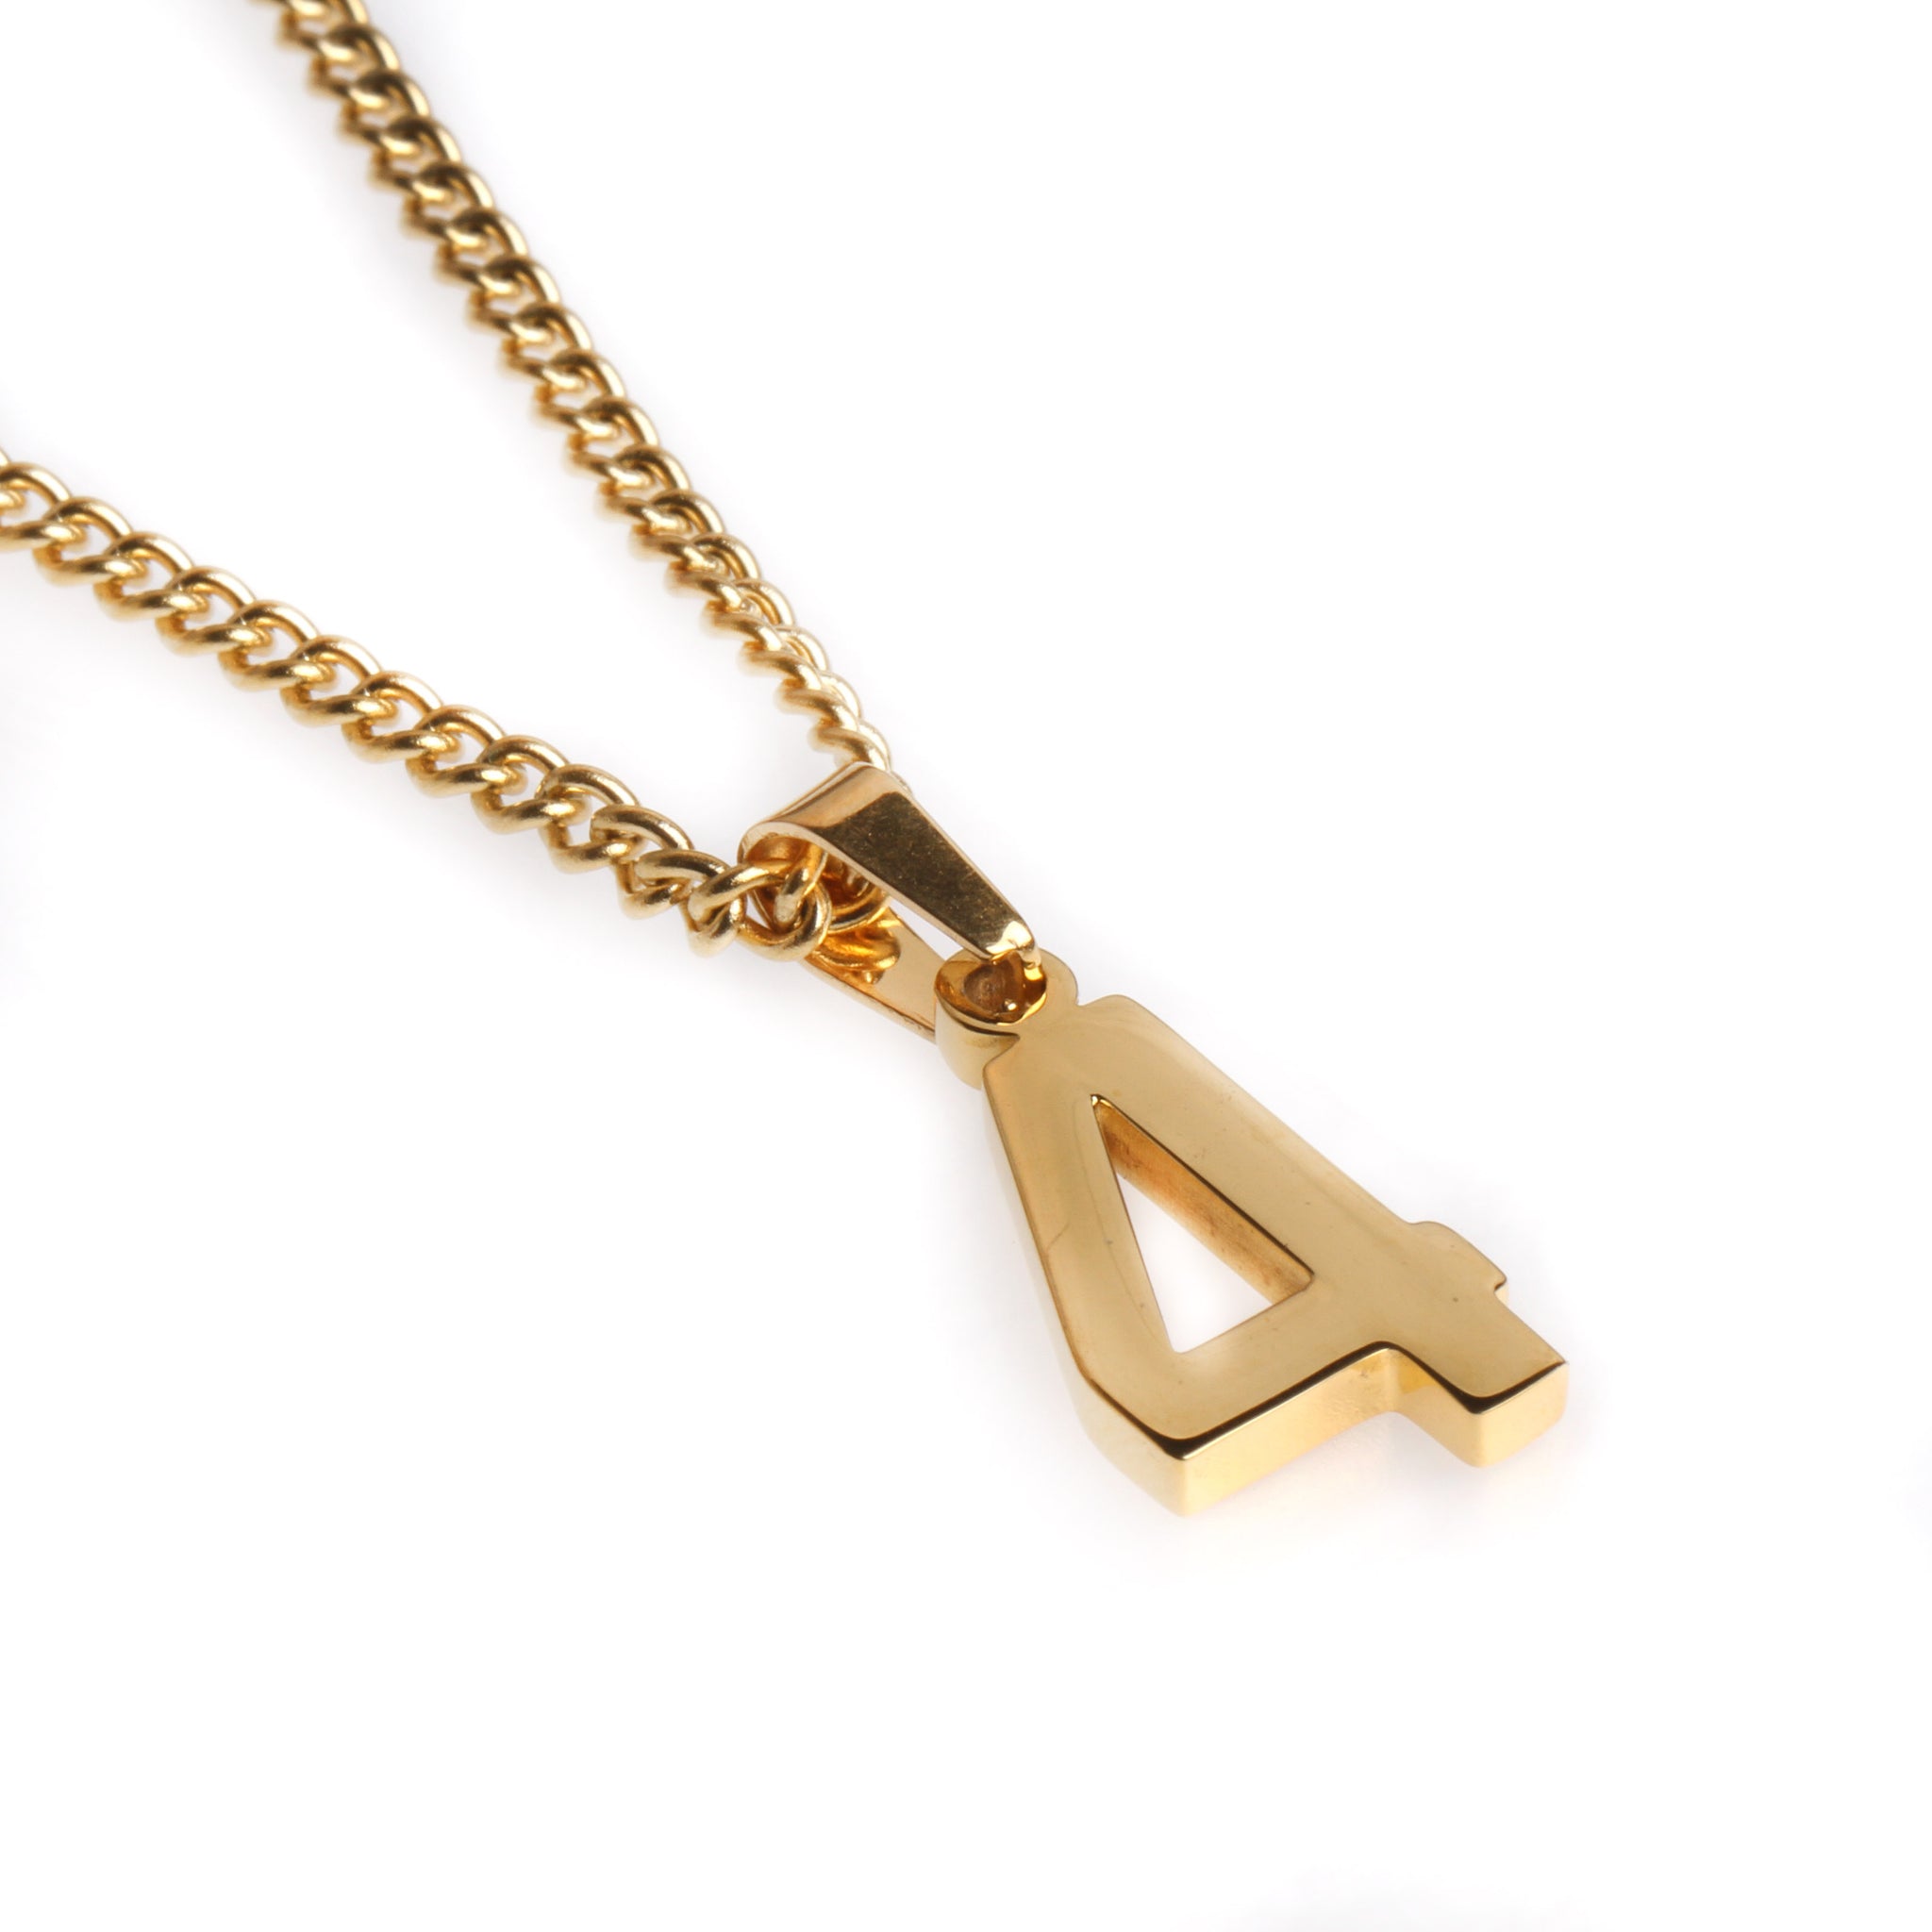 Golden Stainless Polished Jersey Number Pendant and Chain (FREE SHIPPI ...